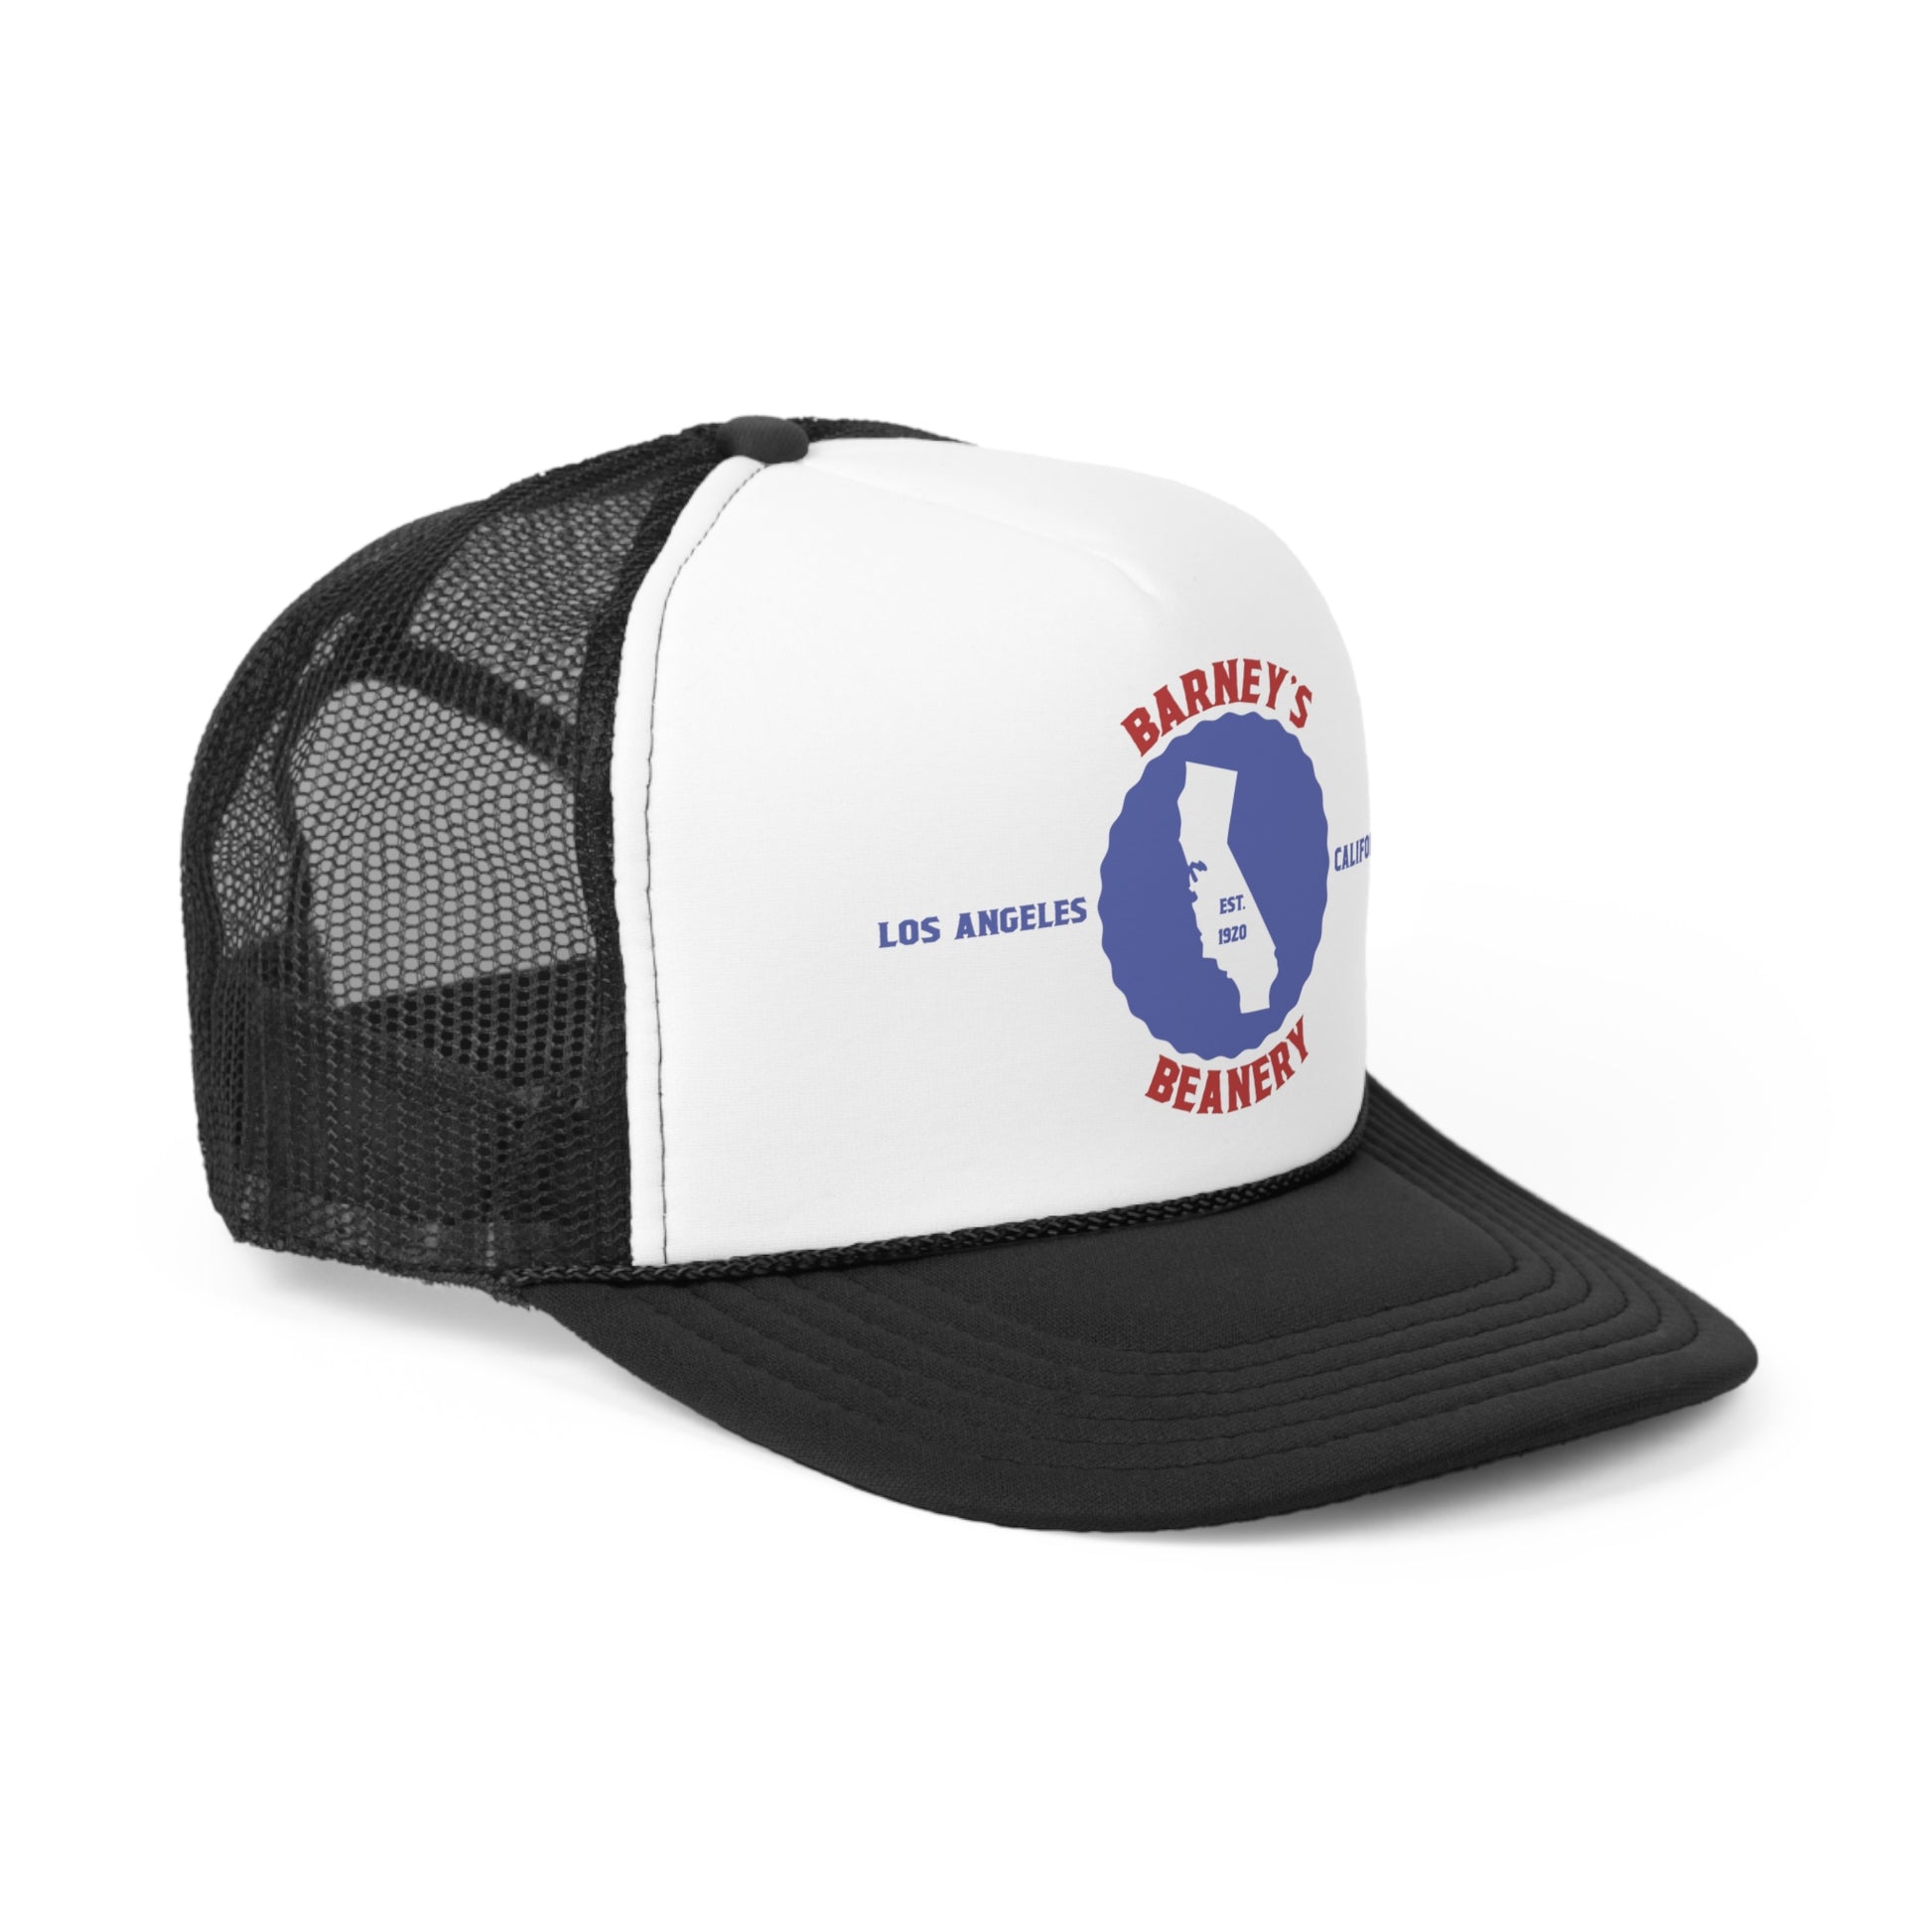 California Badge | BARNEY'S BEANERY - Trucker Hat | Red And Blue Graphic On Black And White Trucker Hat, Front Right View